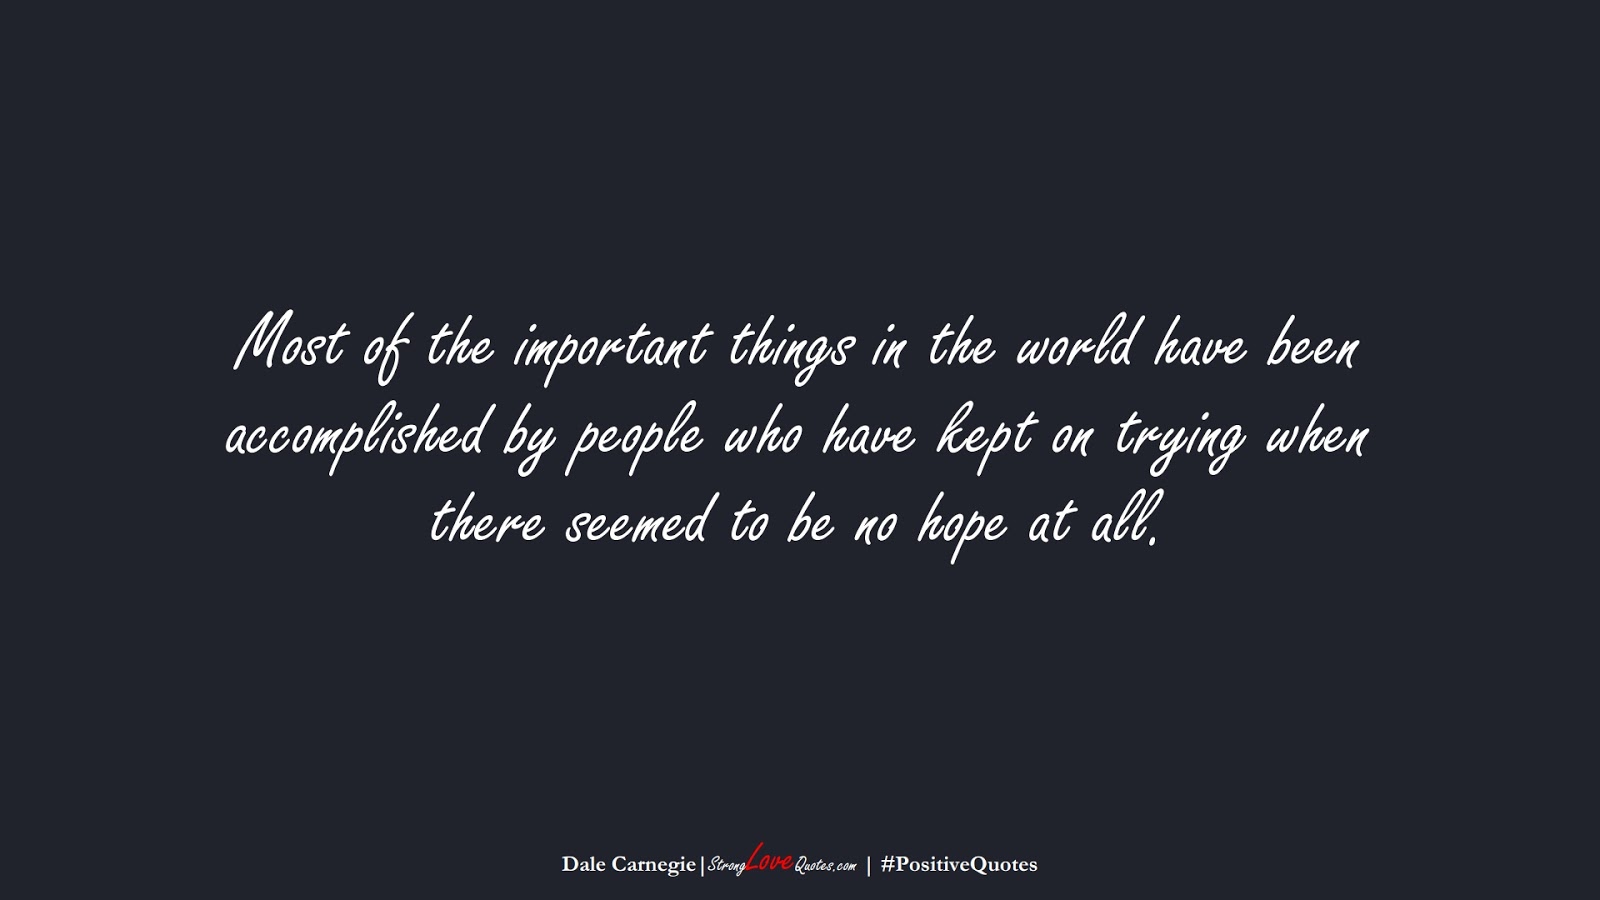 Most of the important things in the world have been accomplished by people who have kept on trying when there seemed to be no hope at all. (Dale Carnegie);  #PositiveQuotes